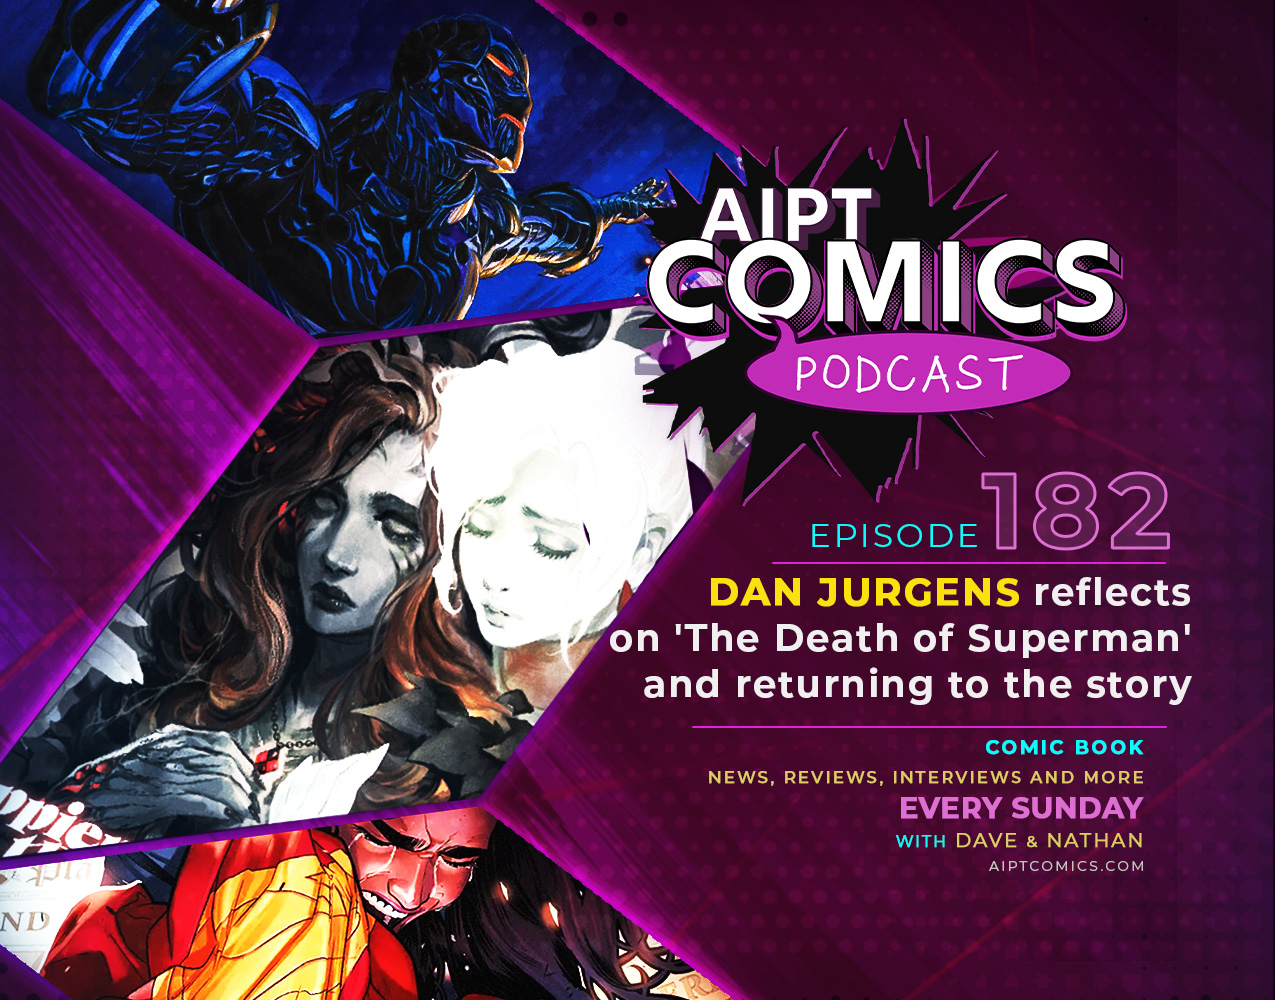 AIPT Comics Podcast Episode 182: Dan Jurgens reflects on 'The Death of Superman' and returning to the story